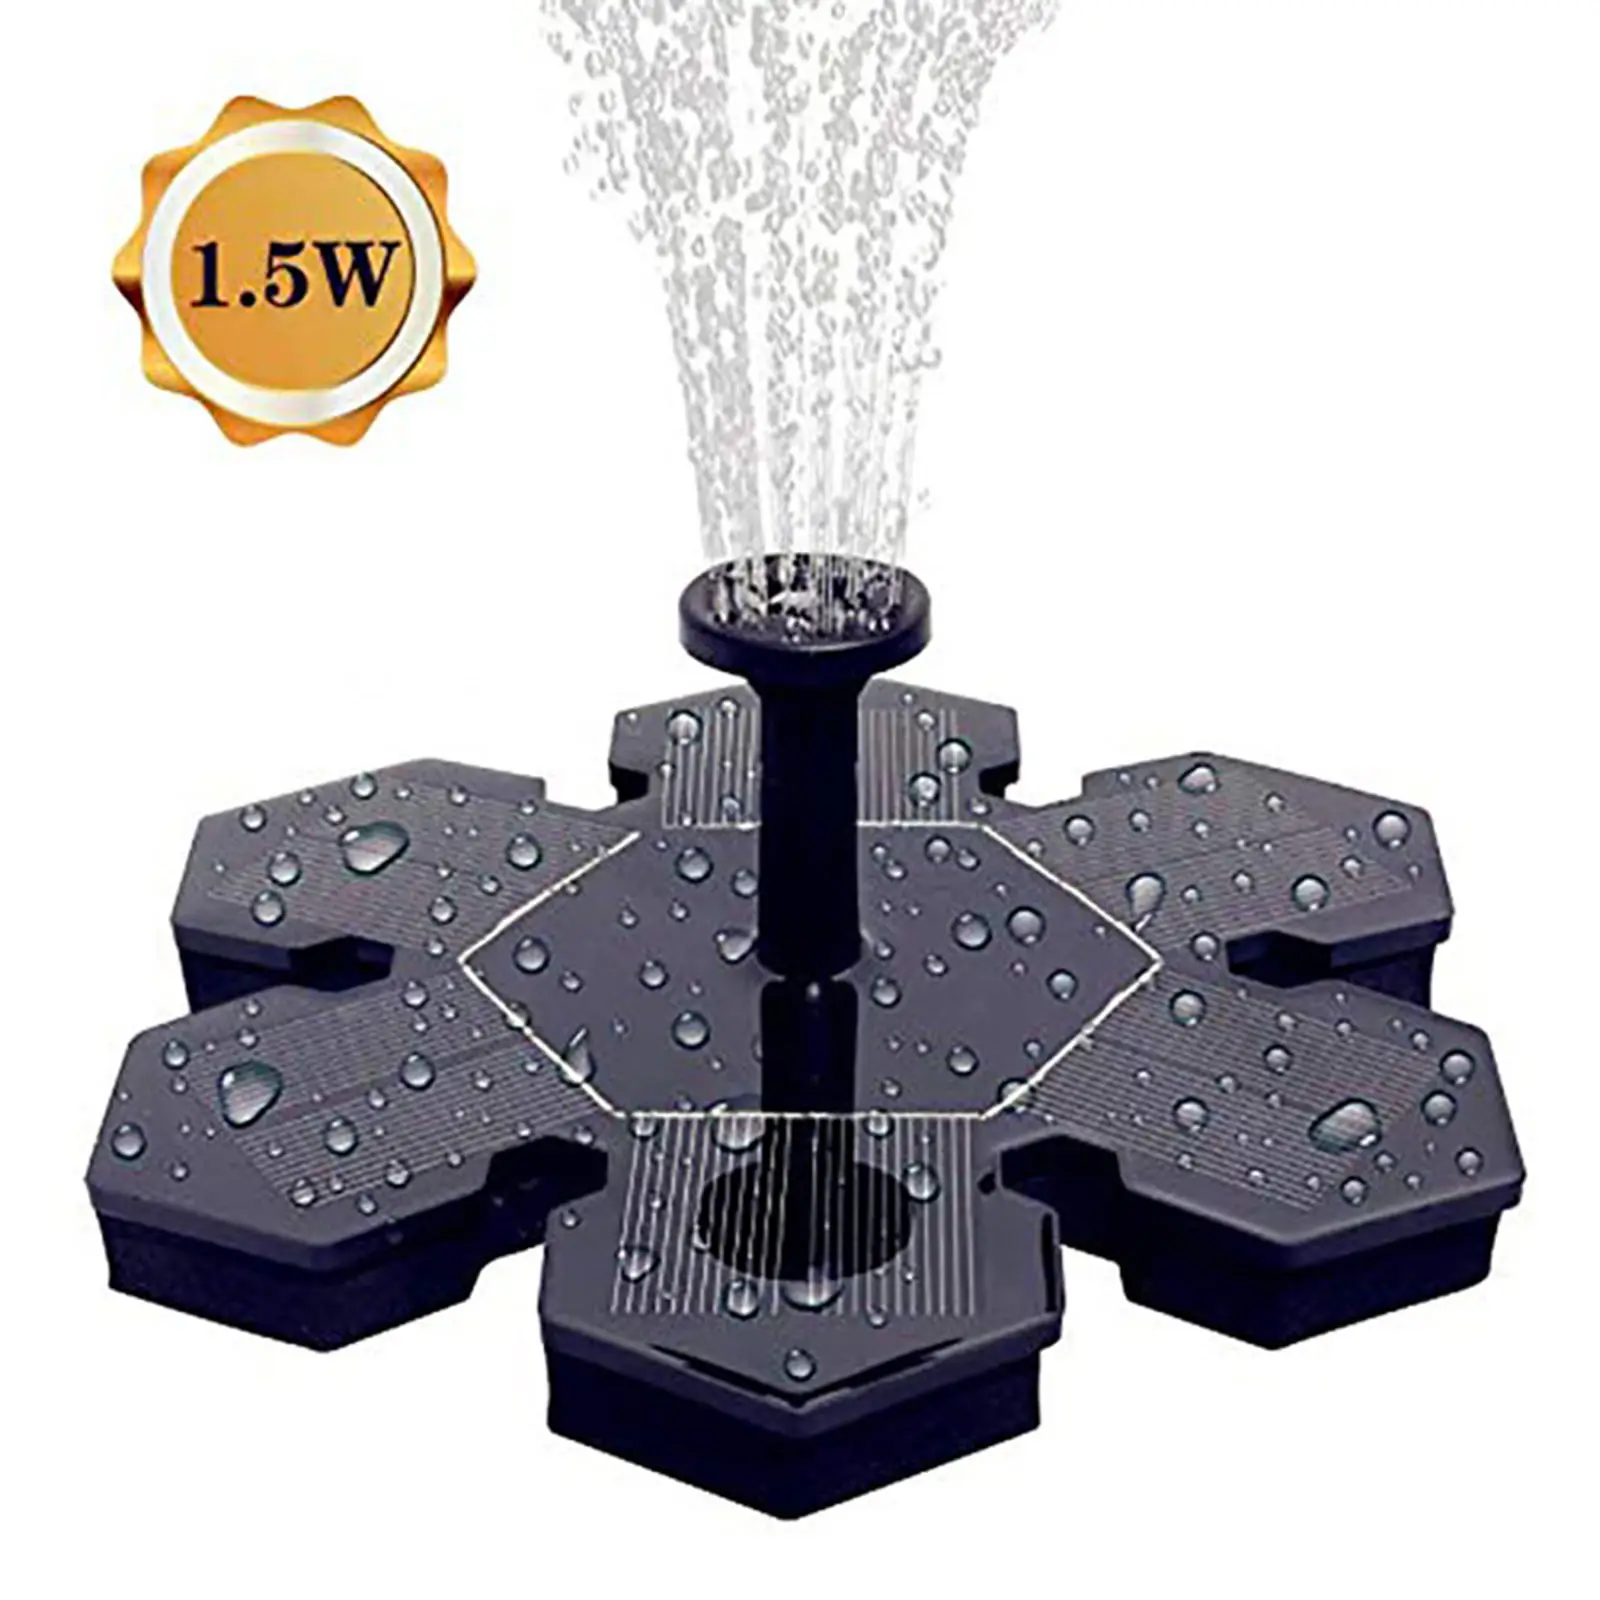 Solar Garden Water Fountain Pond Pool Pump Small Pond Water Circulation For Garden, Patio & Lawn Fish Tank